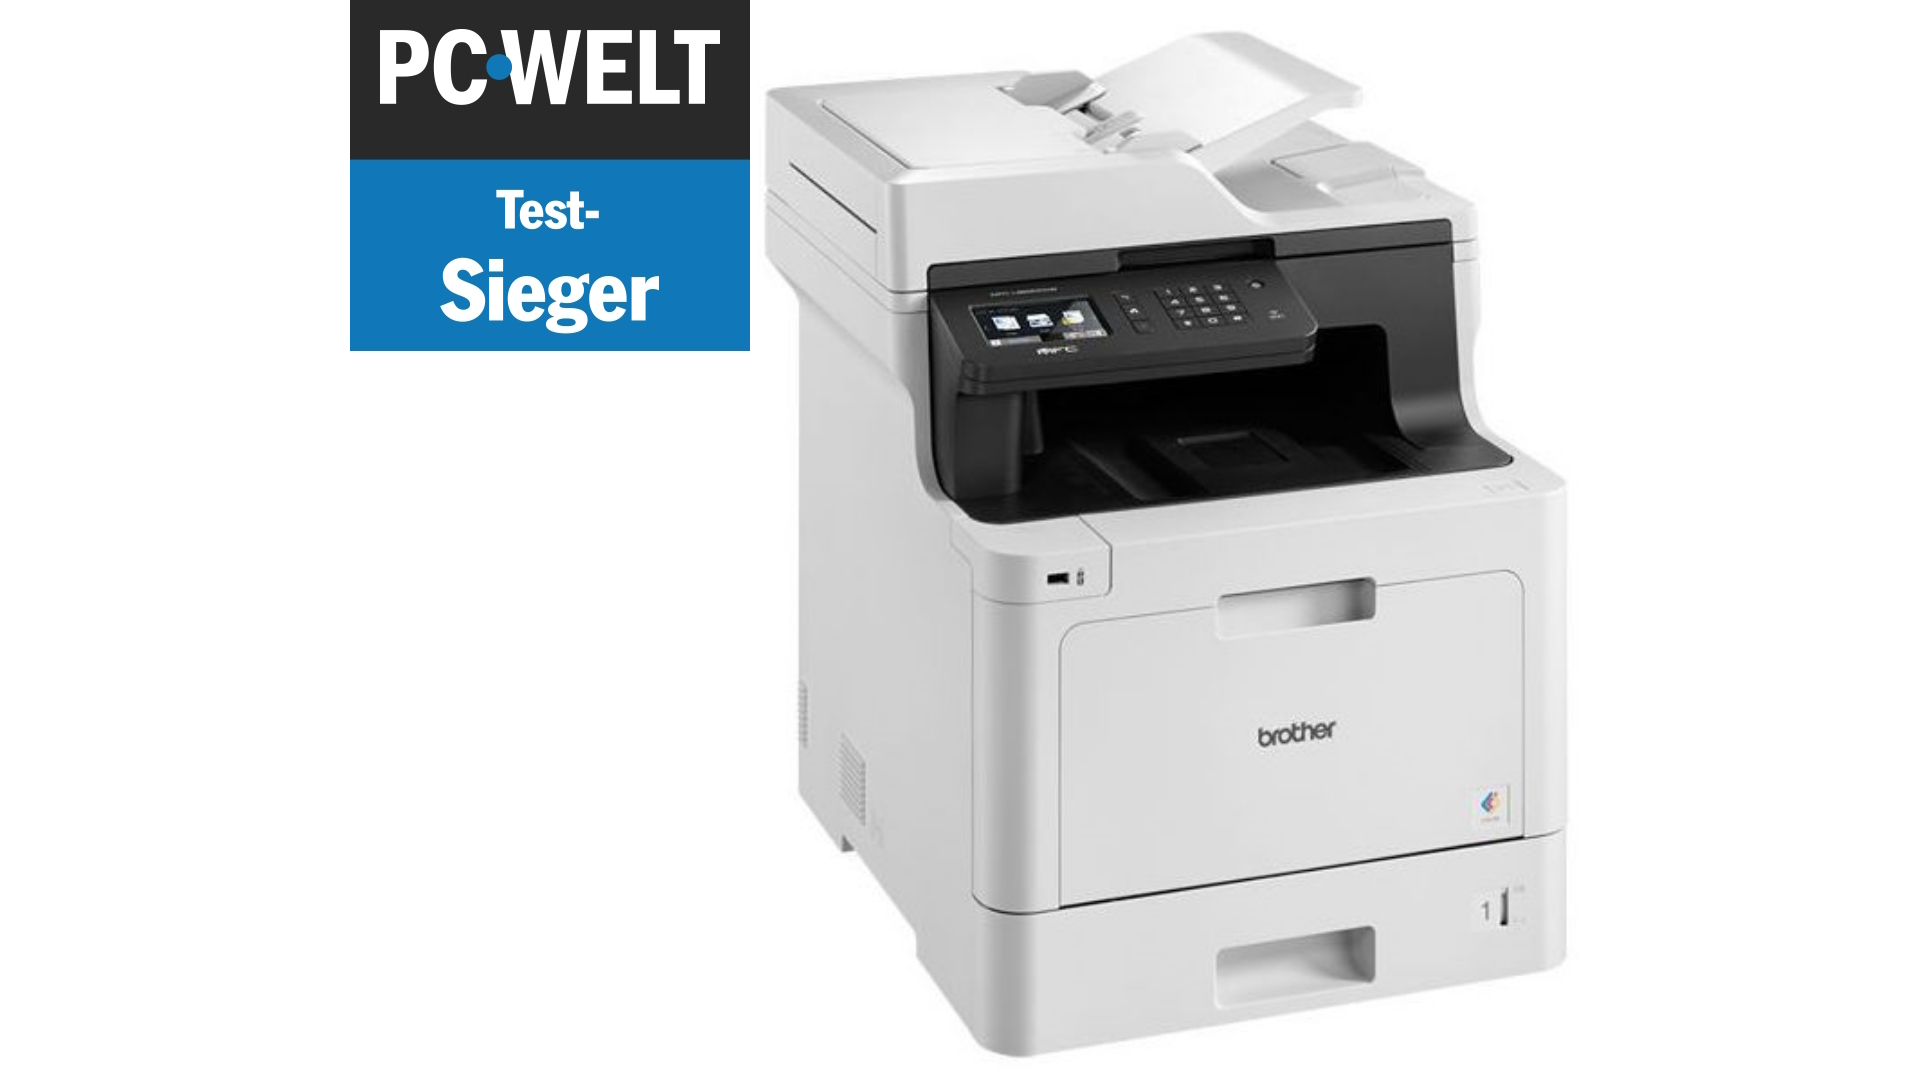 Test-Sieger: Brother MFC-L8690CDW